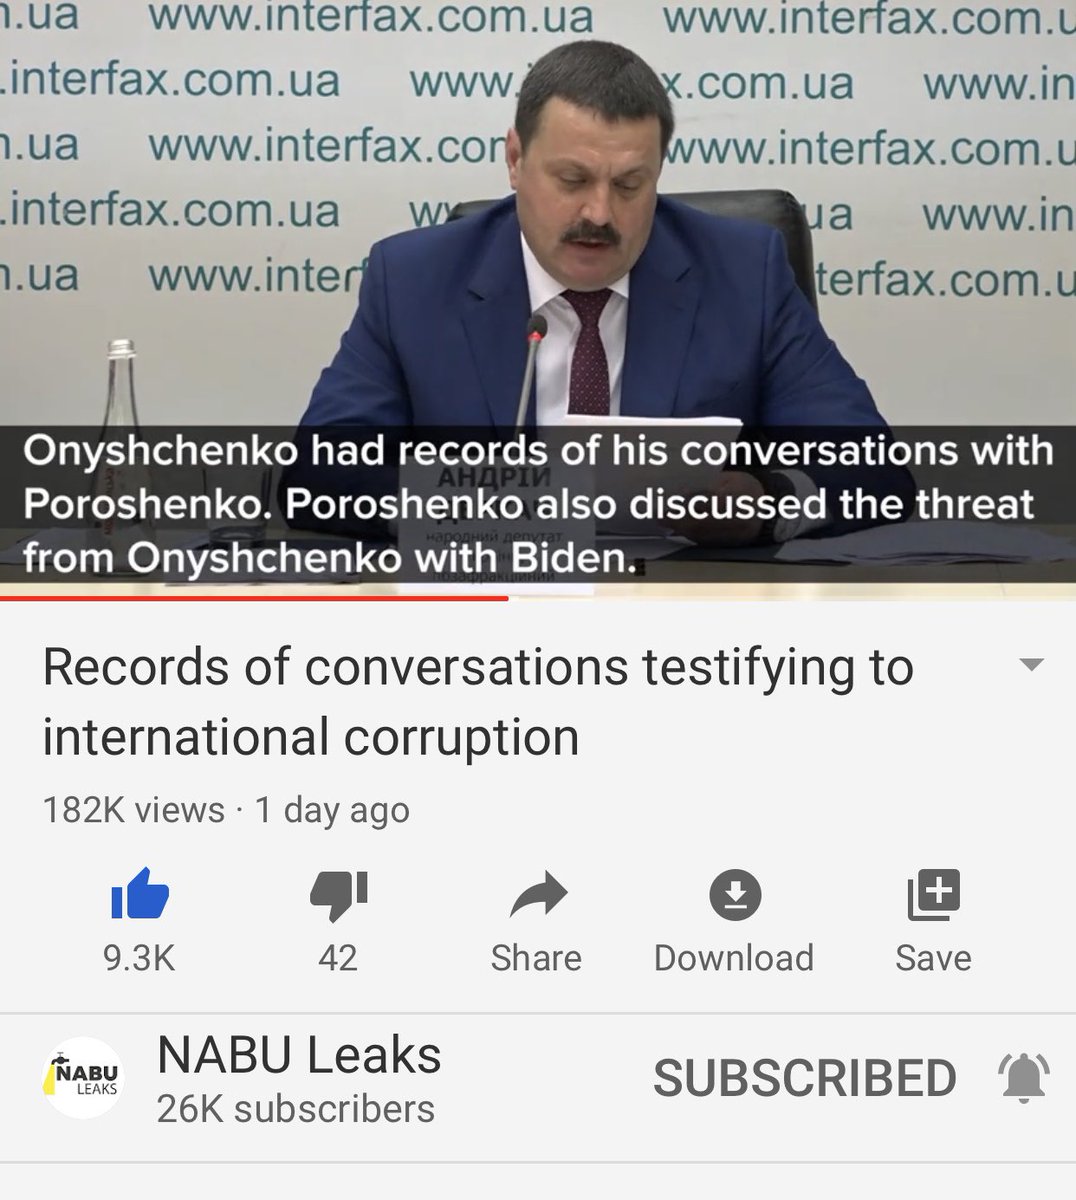 The prosecutor then tells us that Onyshchenko is Poroshenkos partner in crime and helps bribe members of Parliament but turns out Mr O can’t be trusted either and Poroshenko shared this with Biden. Last point: this is all illegal acts by Poroshenko